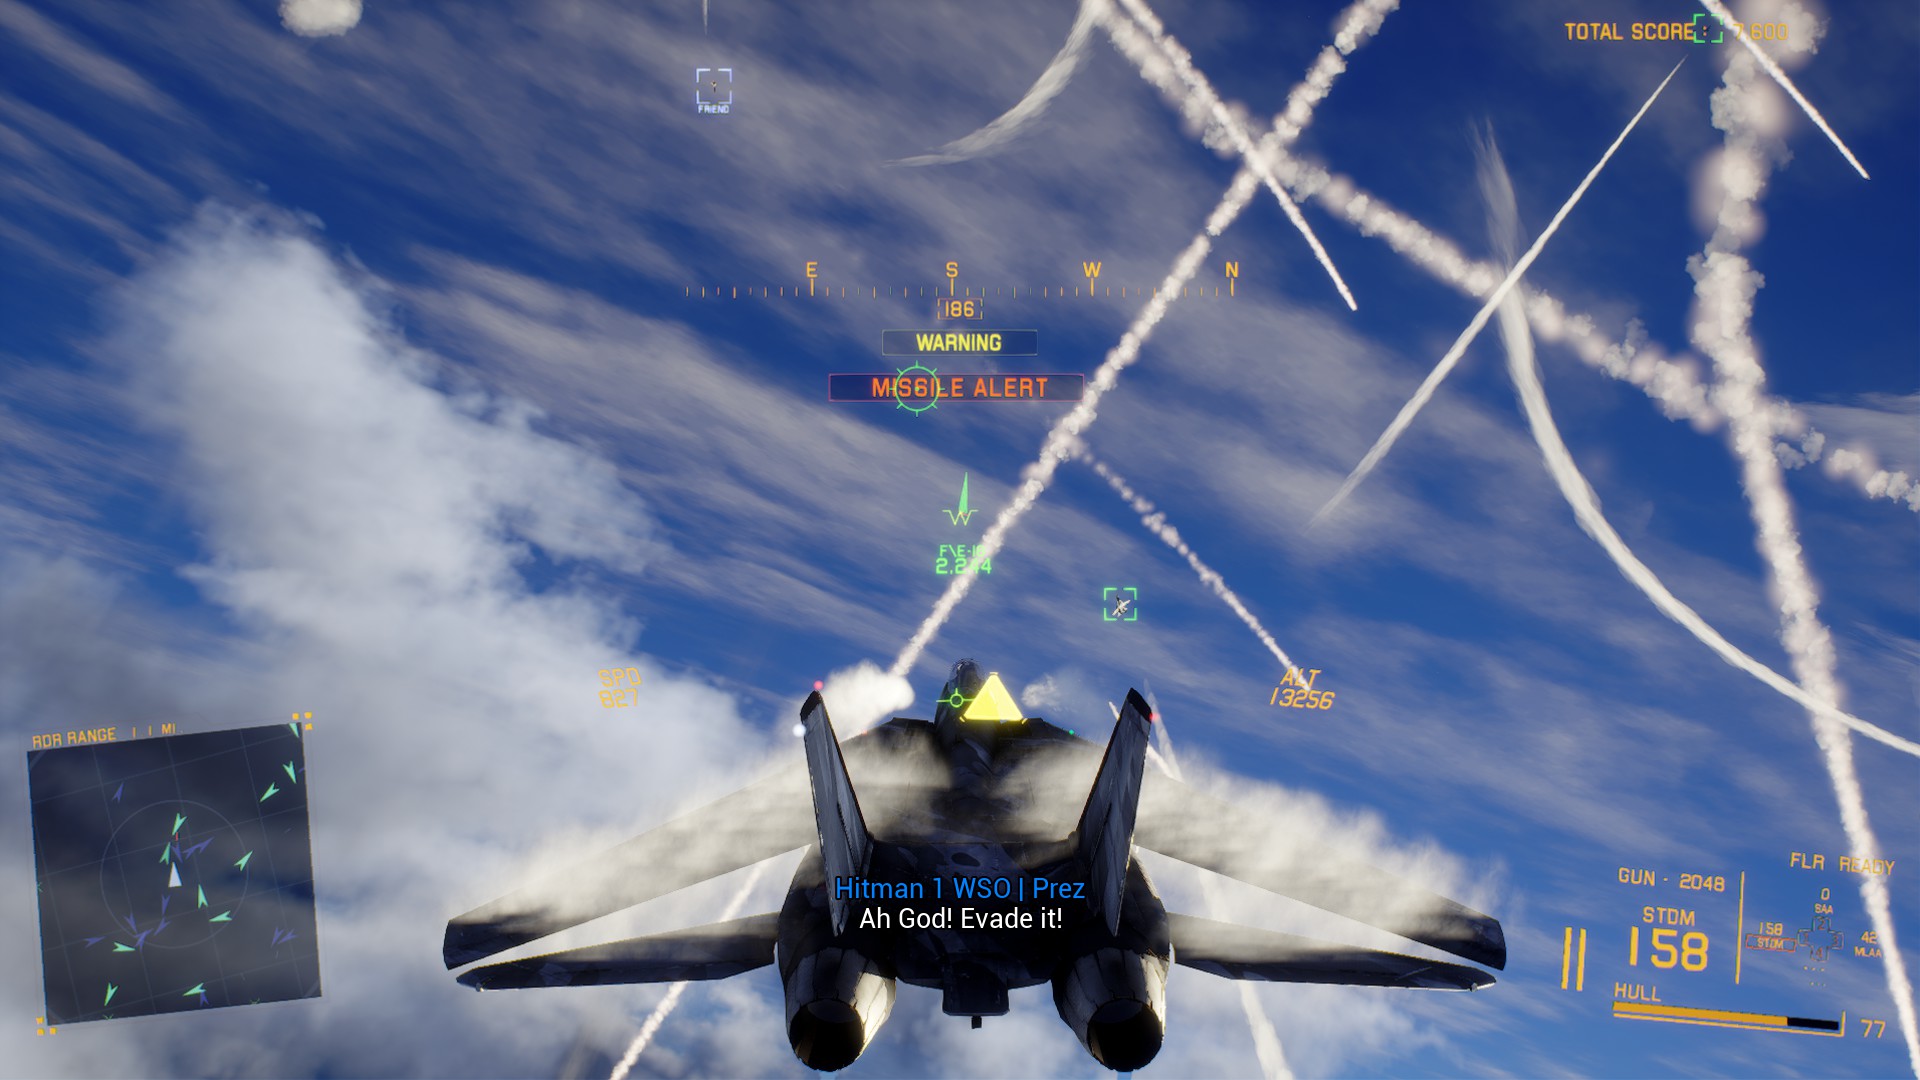 project wingman price download free